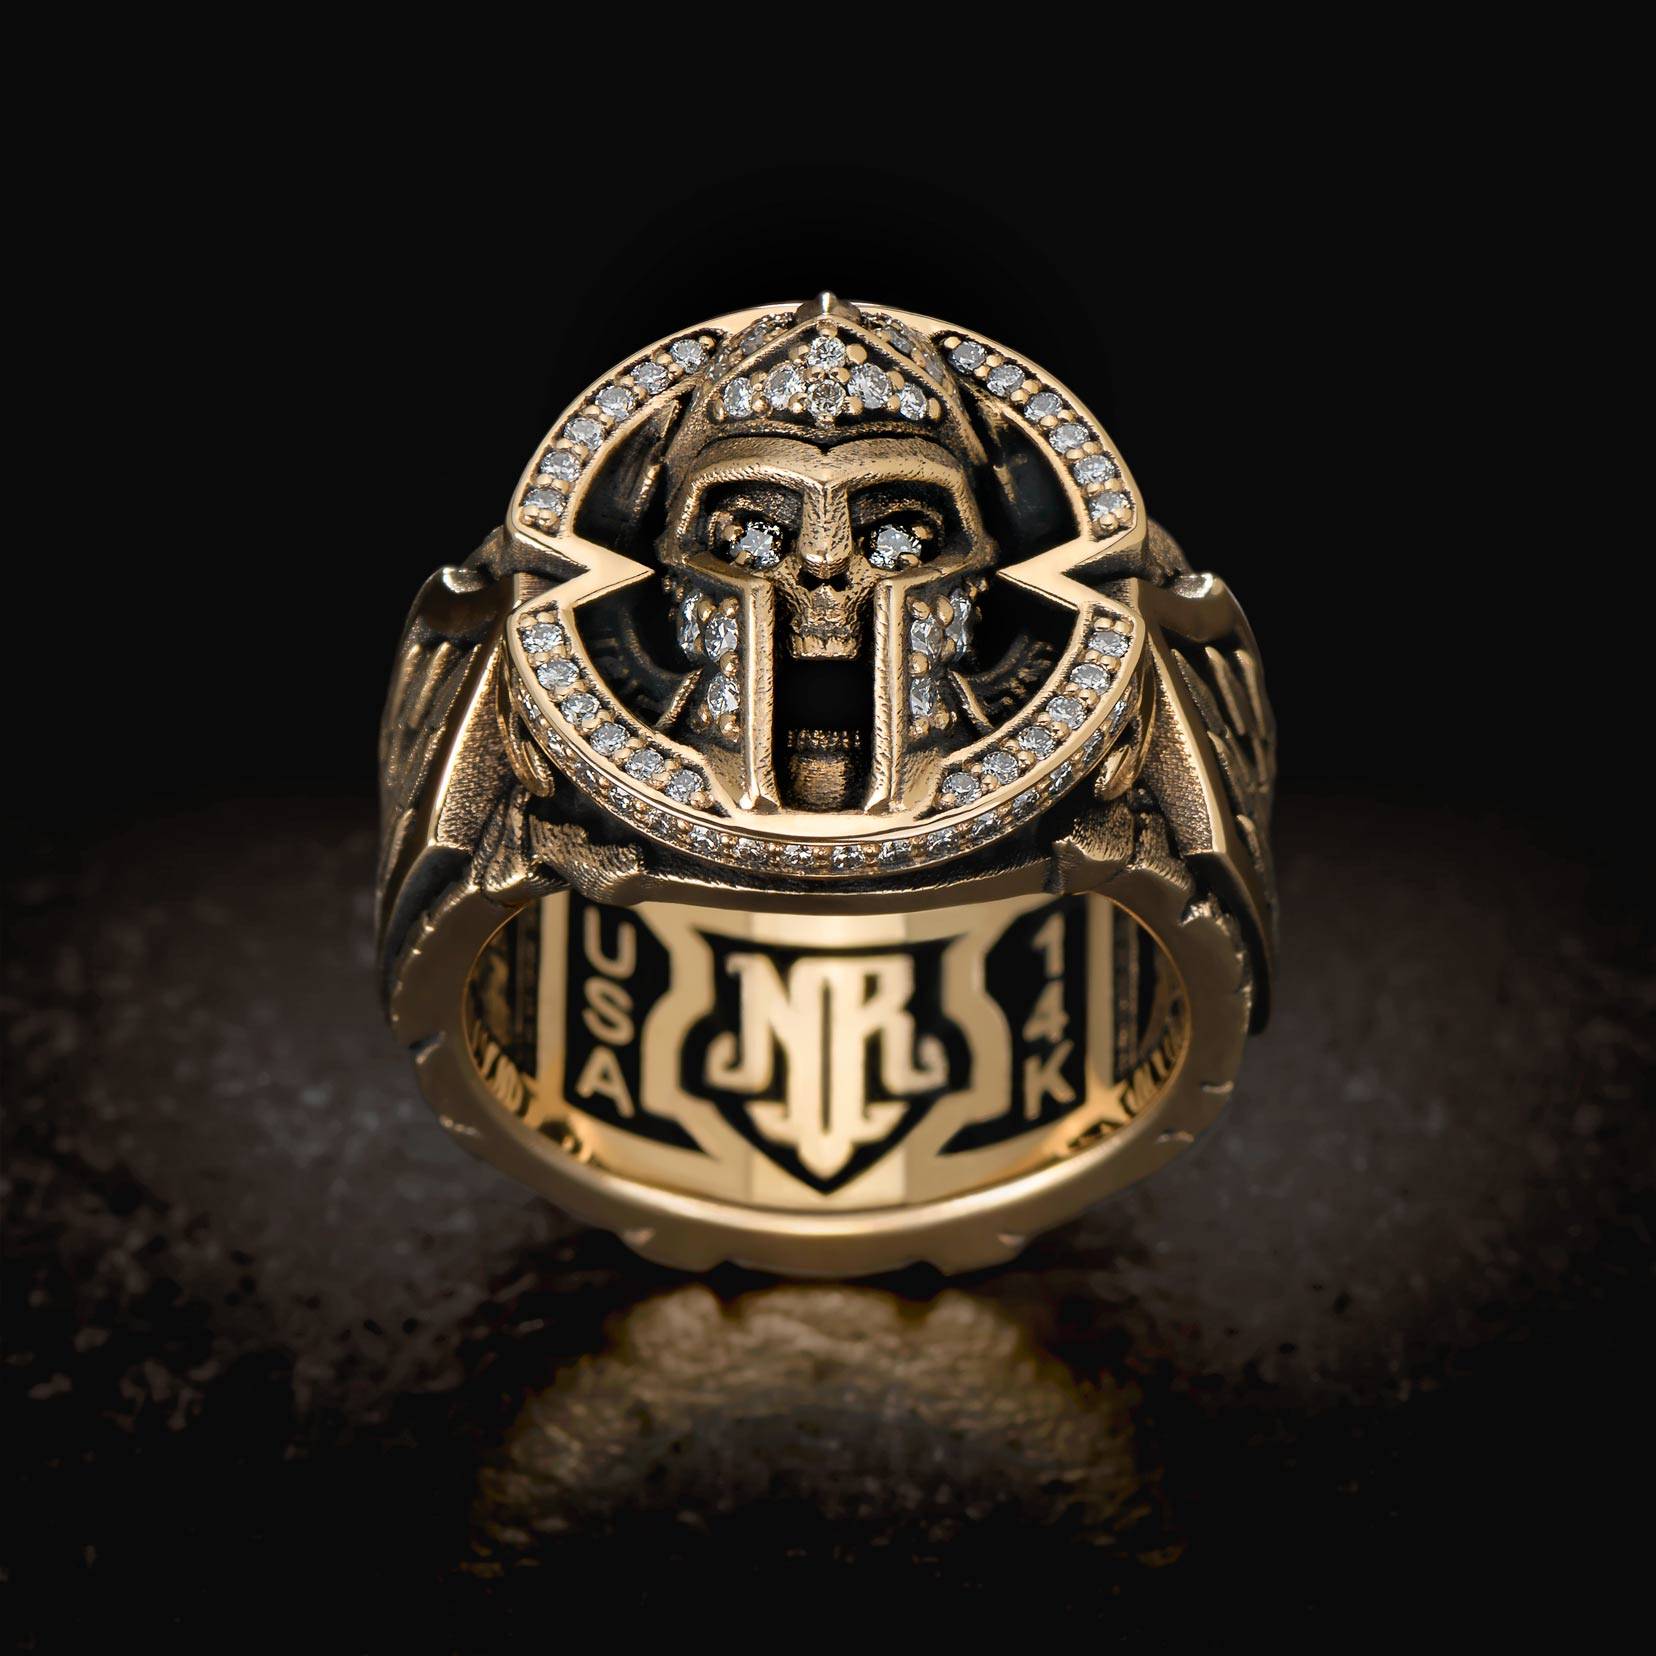 The 14K Jawbone Collection Thermopylae Band Ring with Diamonds